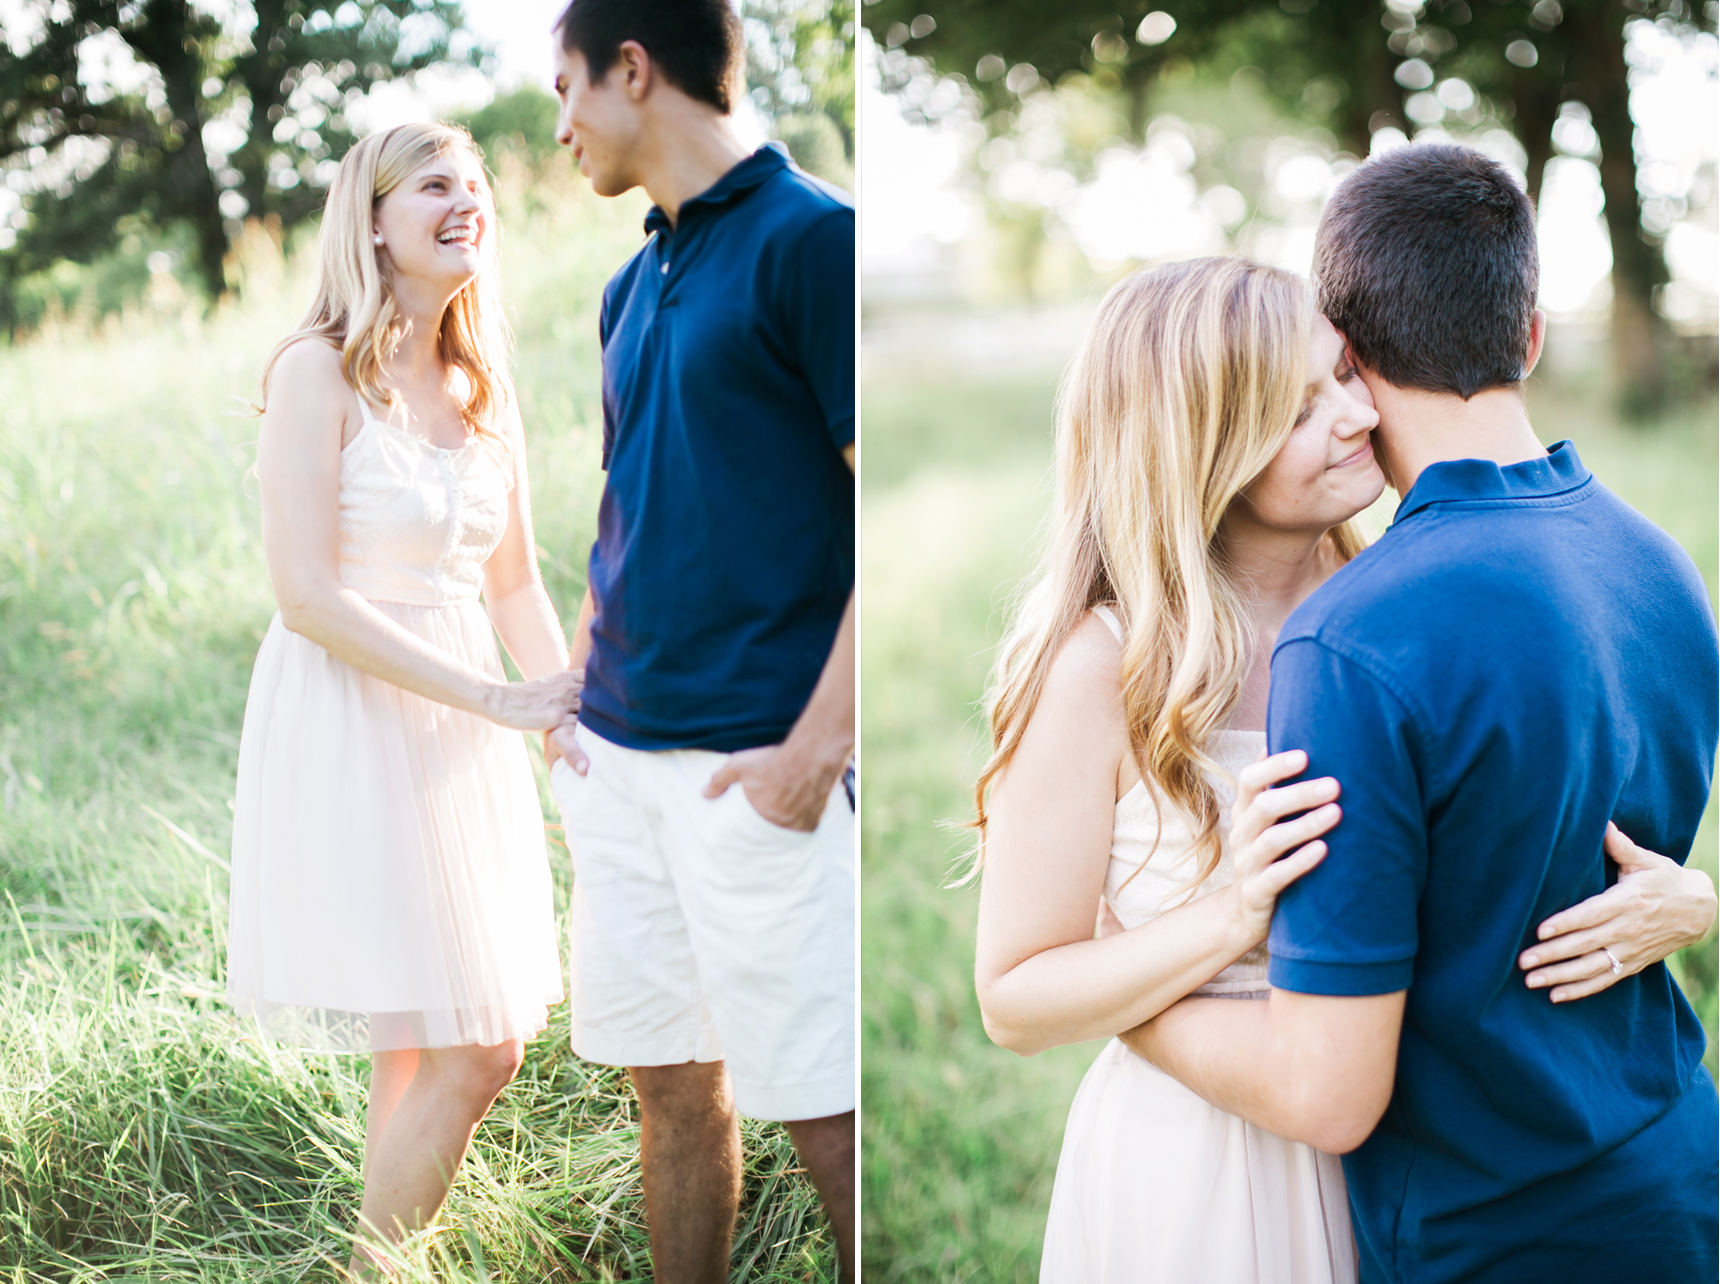 Best engagement photo outfits